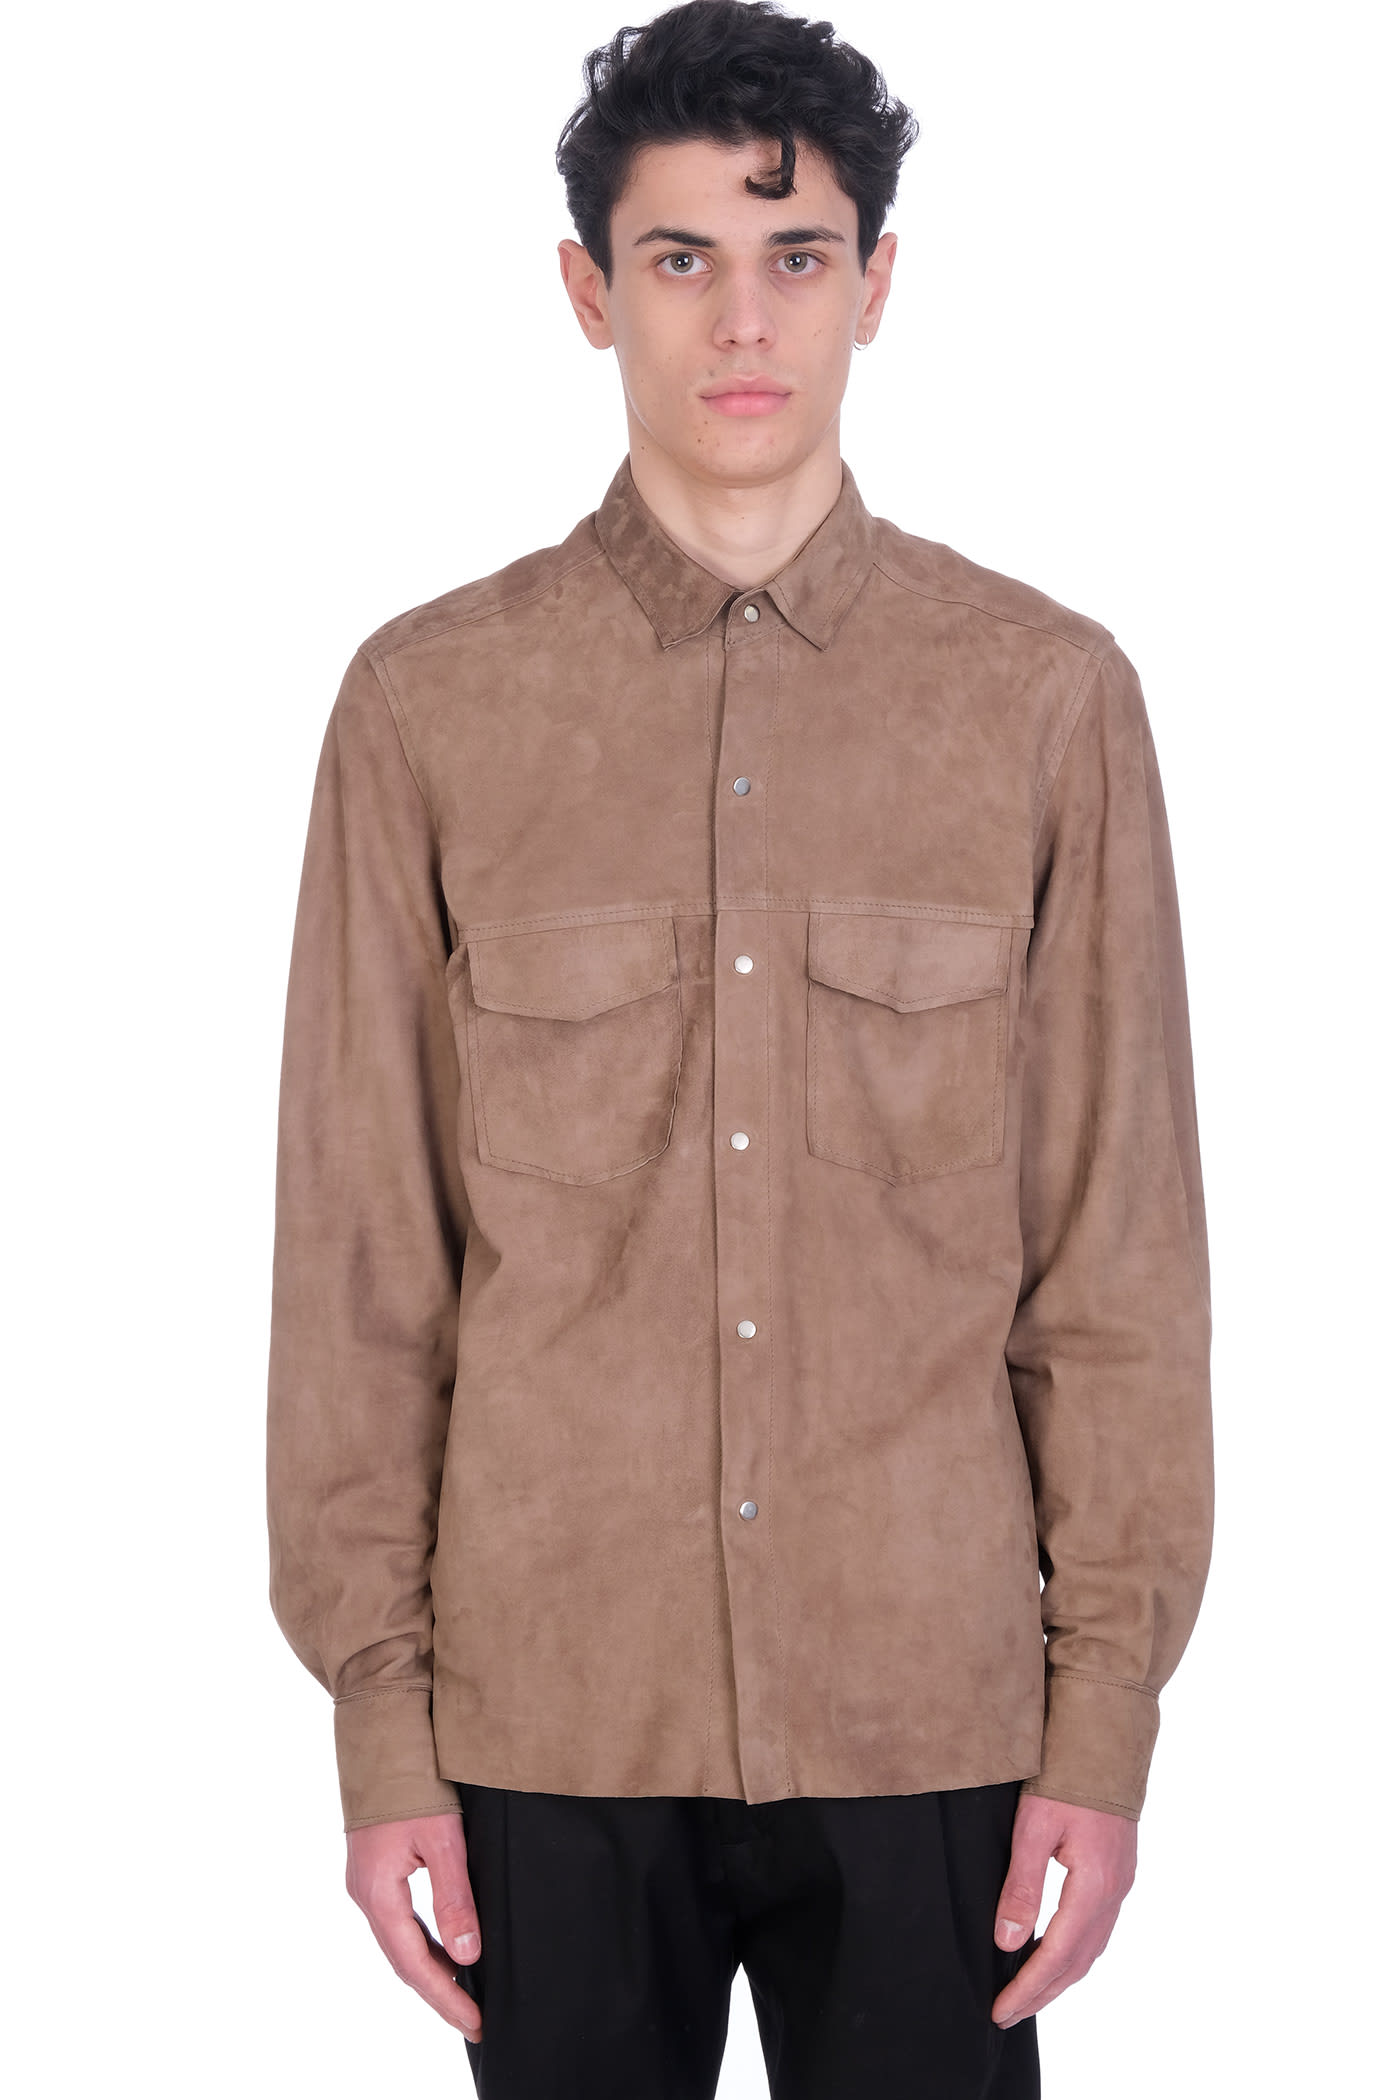 Low Brand Shirt In Beige Leather